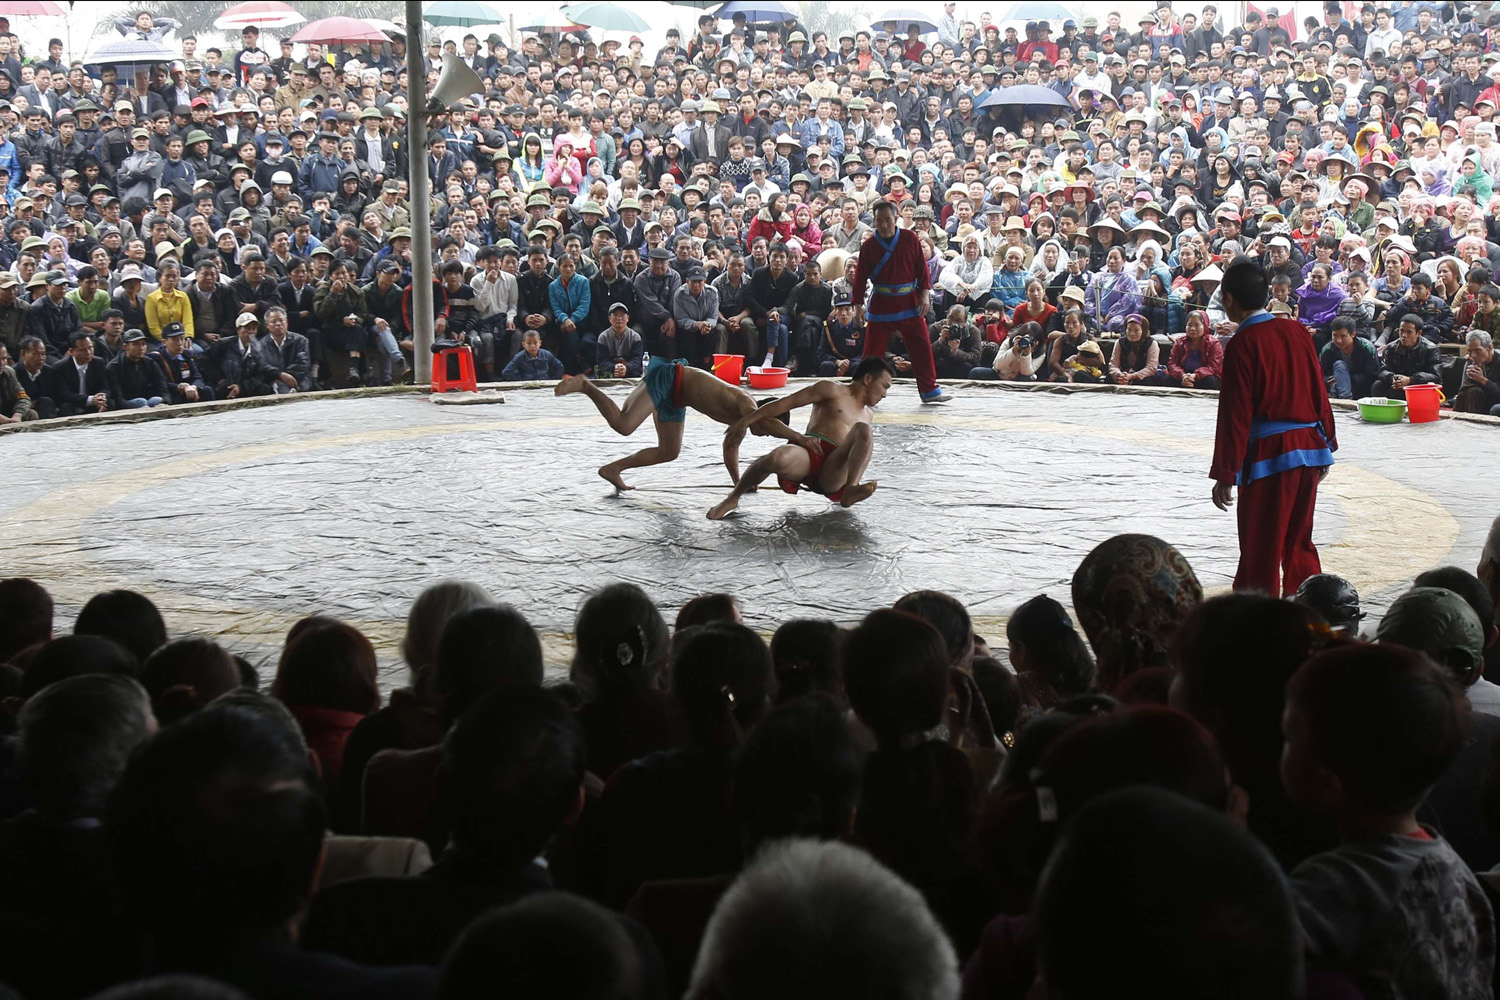 Mar. 6 , 2014. Villagers watch a wrestling match during Chua Nanh festival in Ninh Hiep village, outside Hanoi. Several hundred wrestlers gathered to compete in a three-day annual festival from in Ninh Hiep village which is well-known as one of richest village in Northern Vietnam.